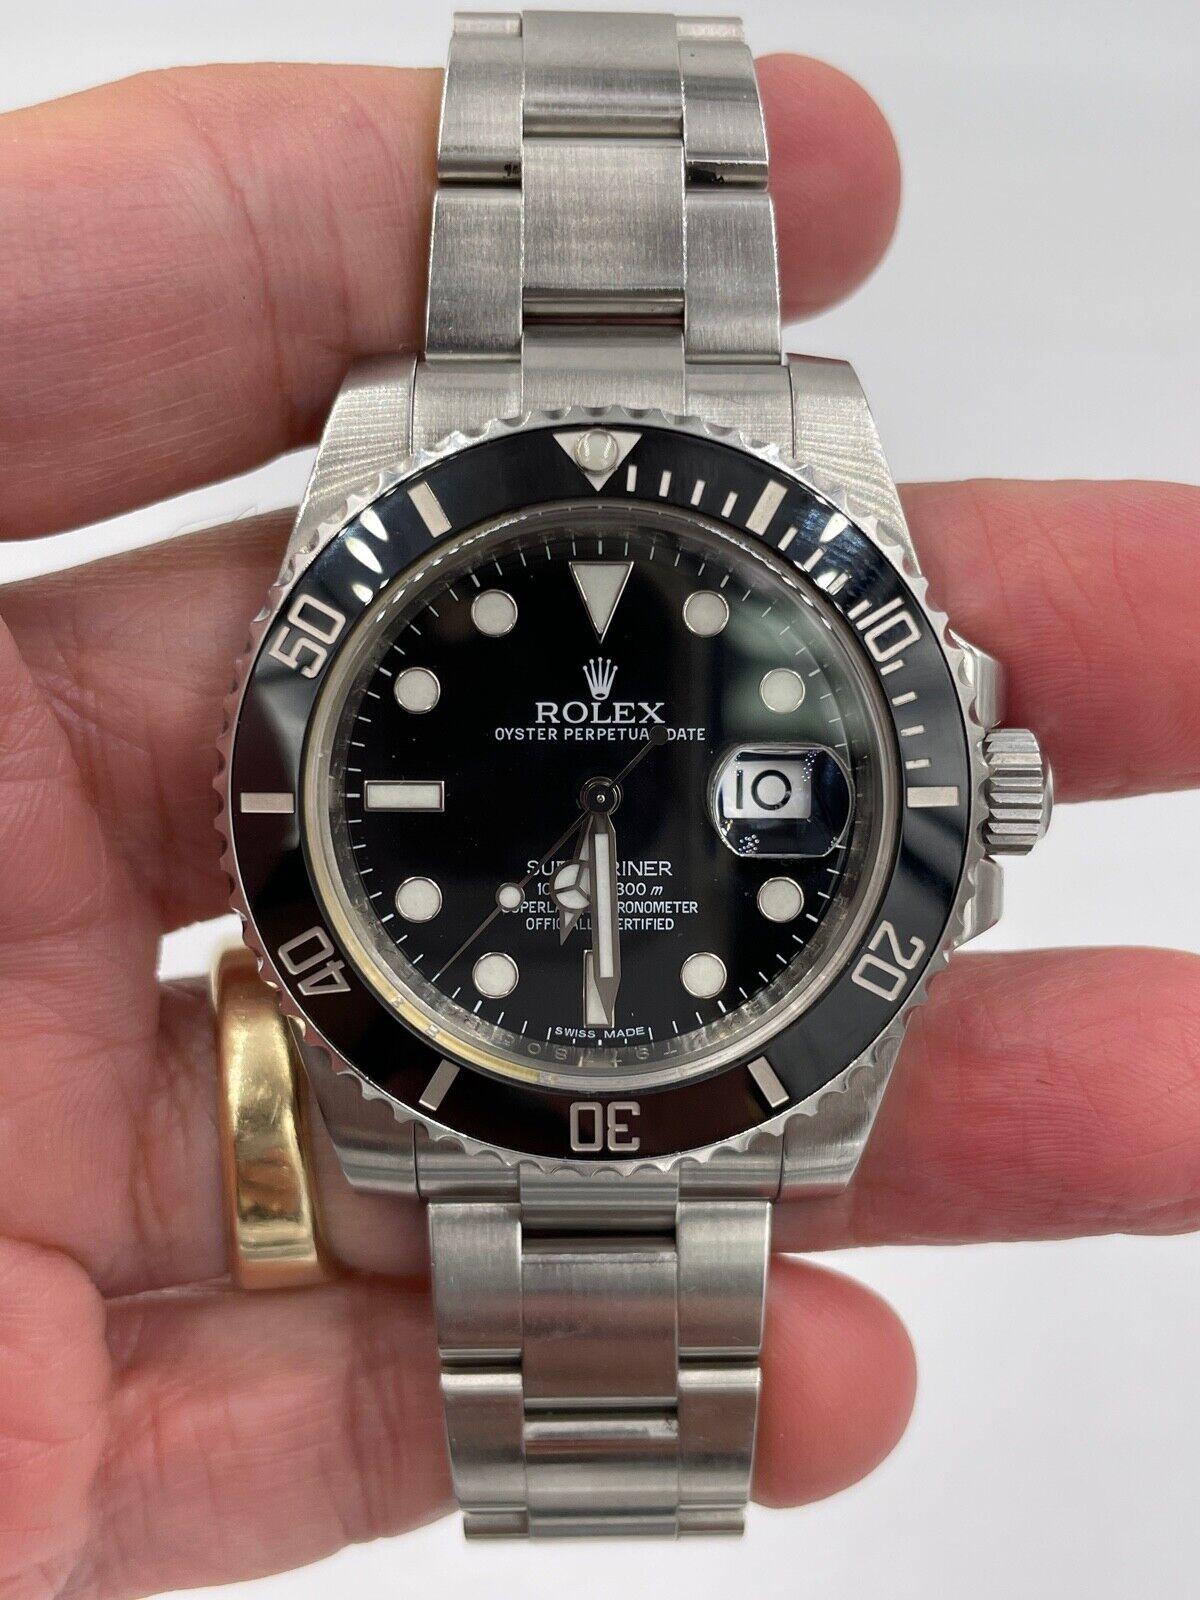 Rolex Submariner 116610 Oyster Perpetual Date Stainless Steel Wristwatch 2015.

ABOUT THIS ITEM: Rolex Submariner Black Dial and Bezel Stainless Steel 40mm. This watch is in very good condition unpolished with minimal signs of wear. A great watch to